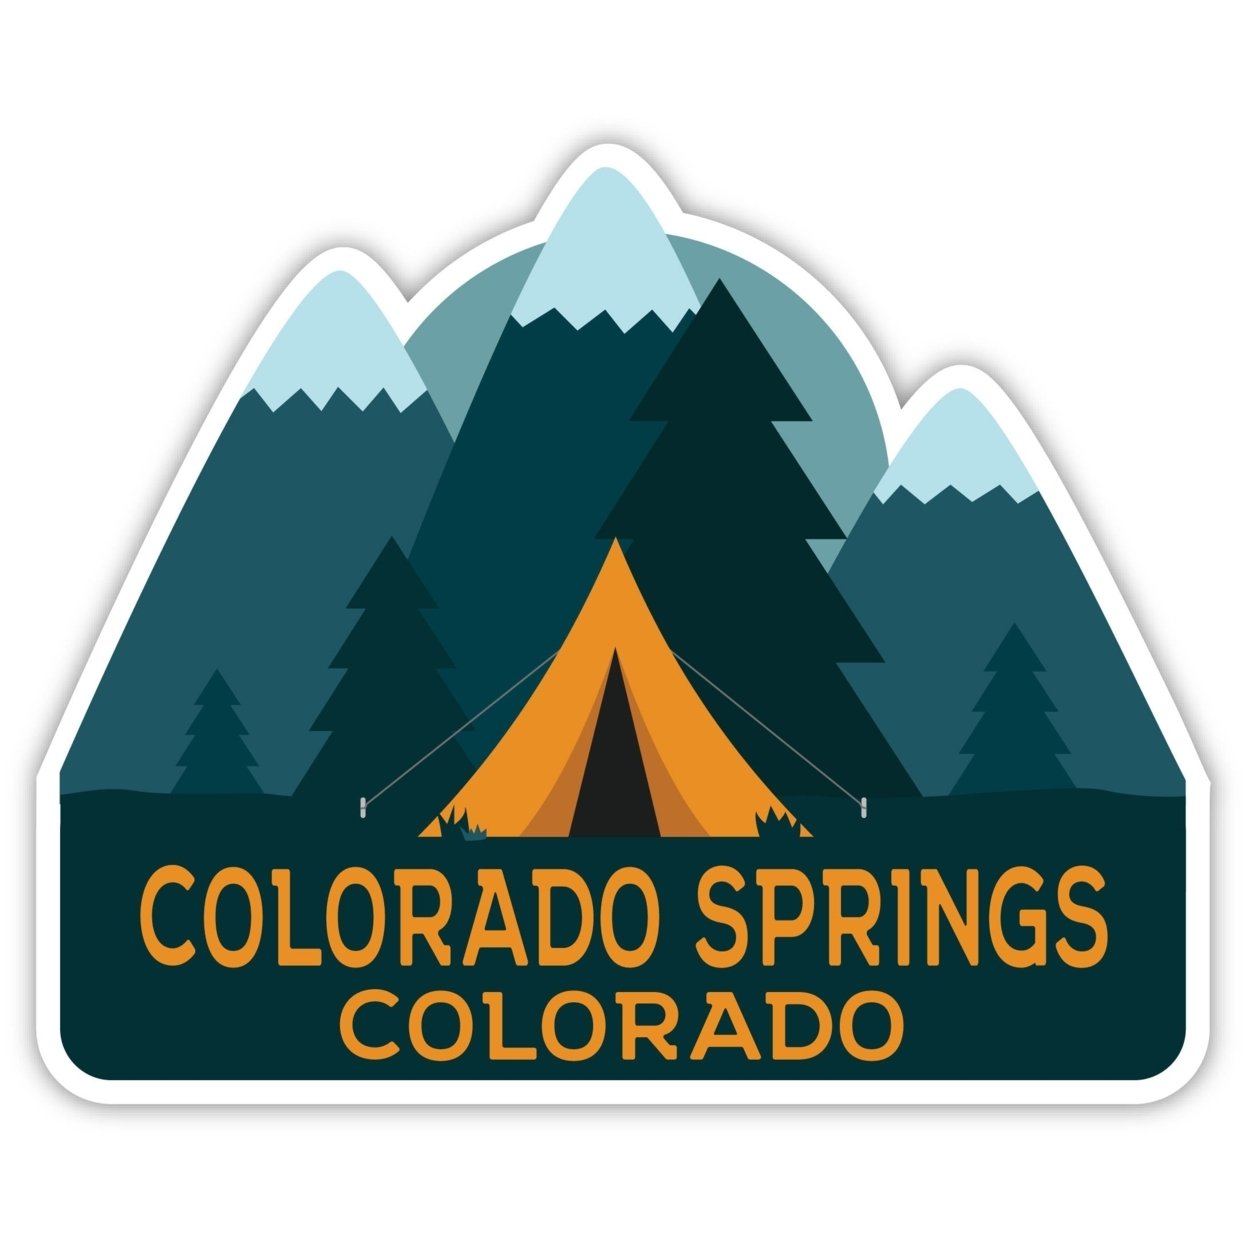 Colorado Springs Colorado Souvenir Decorative Stickers (Choose Theme And Size) - 4-Pack, 10-Inch, Great Outdoors